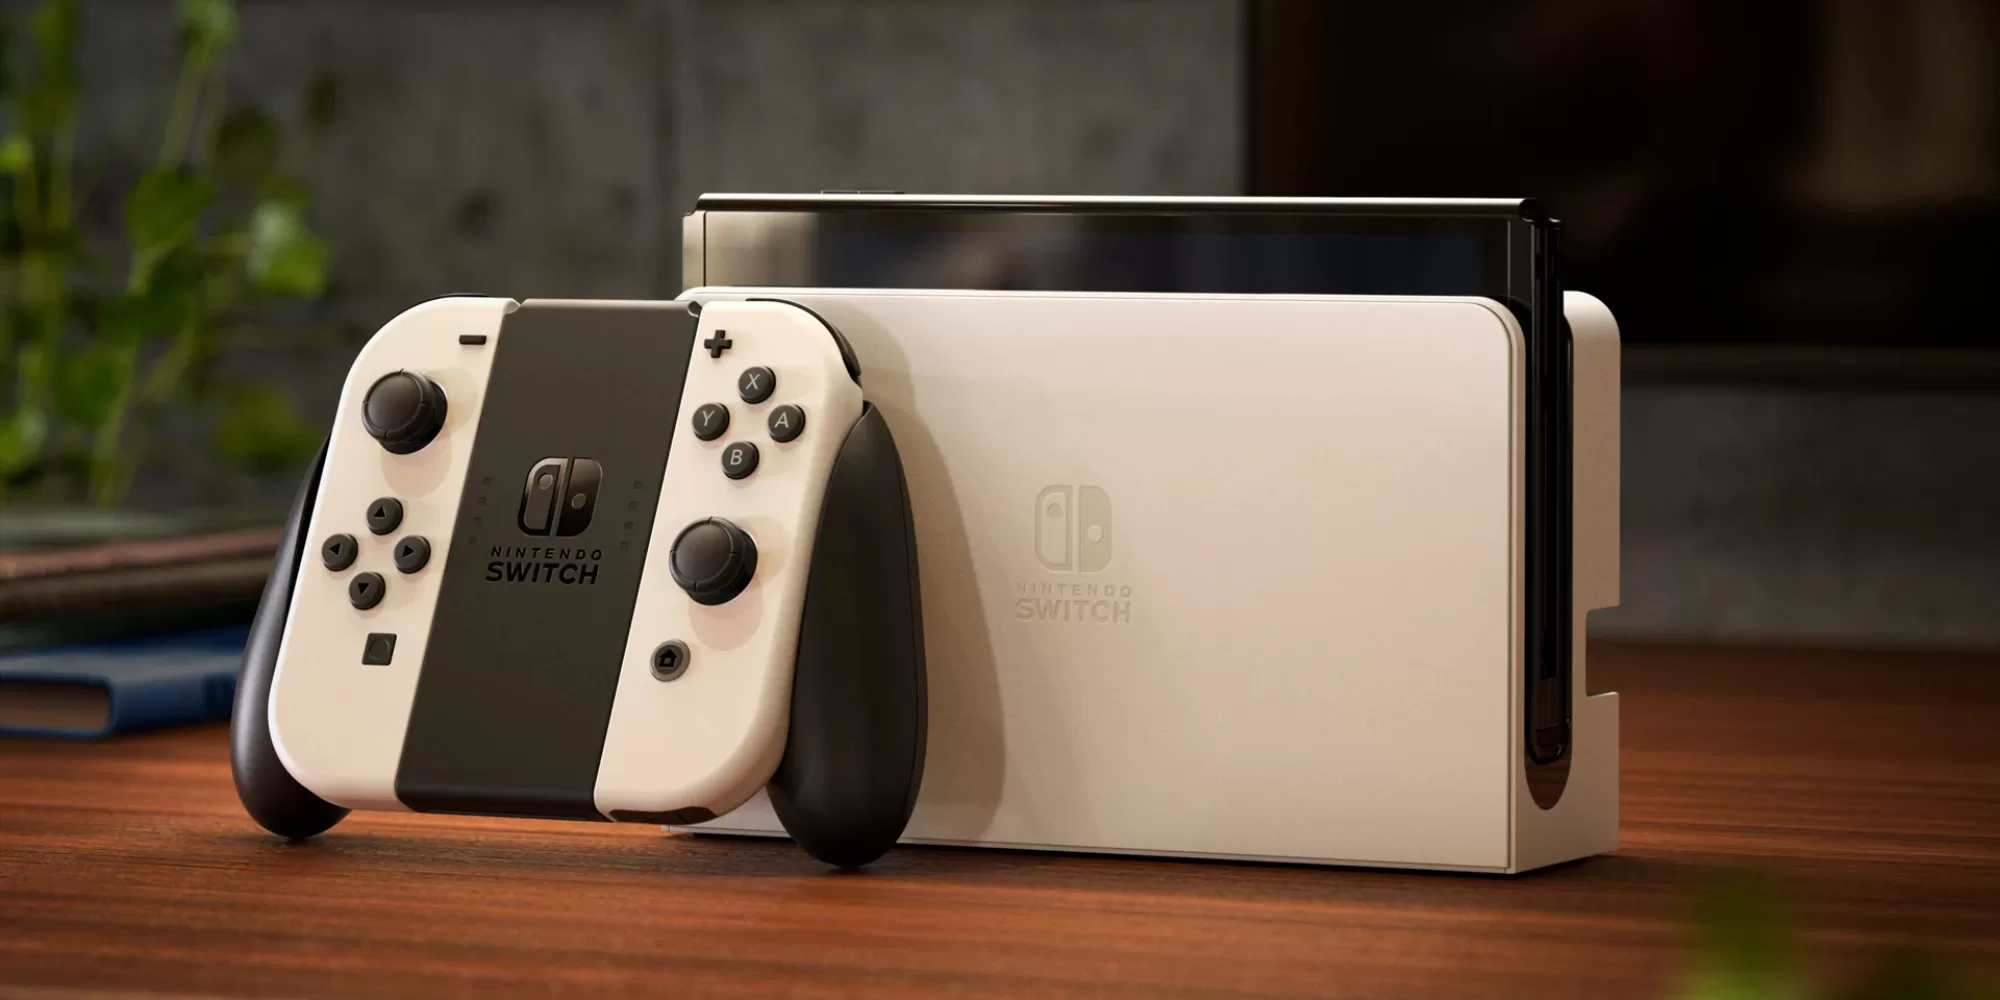 You can now buy the Nintendo Switch OLED upgraded model